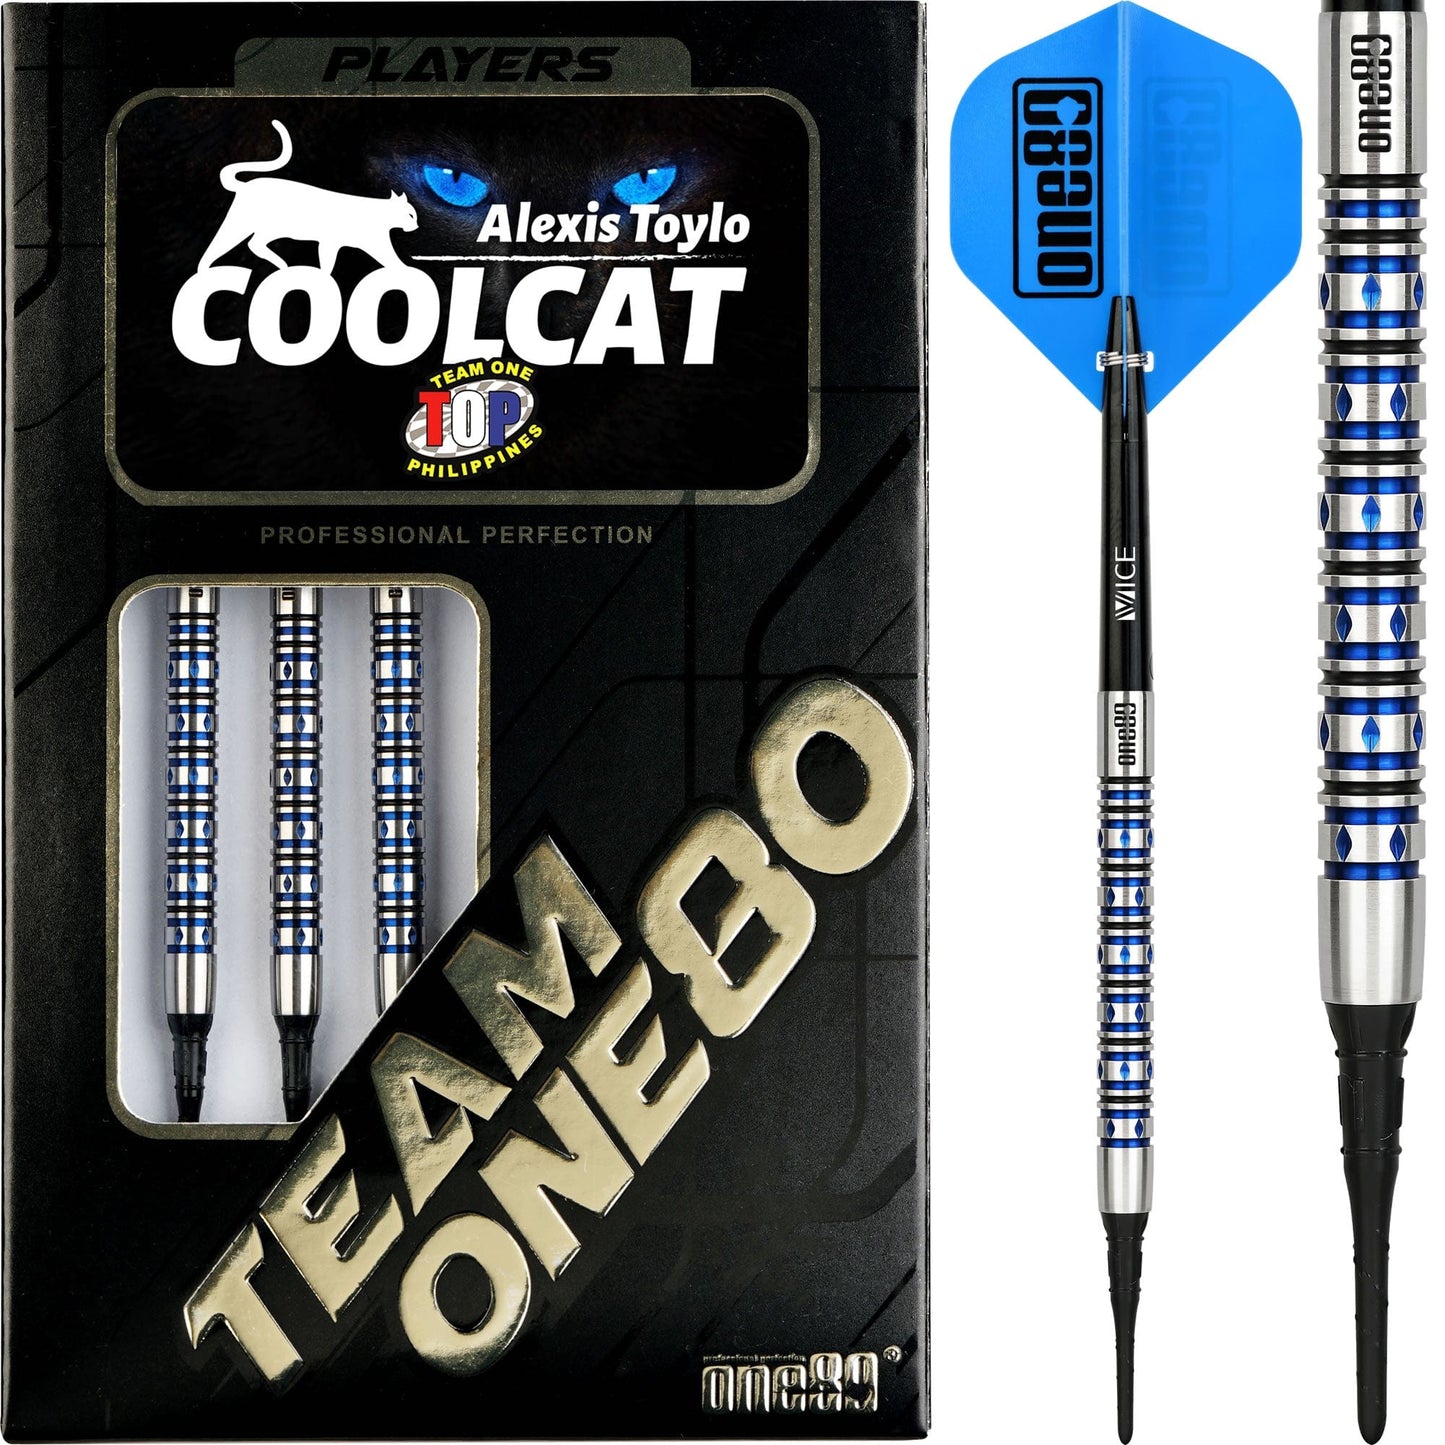 One80 Alexis Toylo Darts - Soft Tip - Cool Cat - Blue - 20g 20g